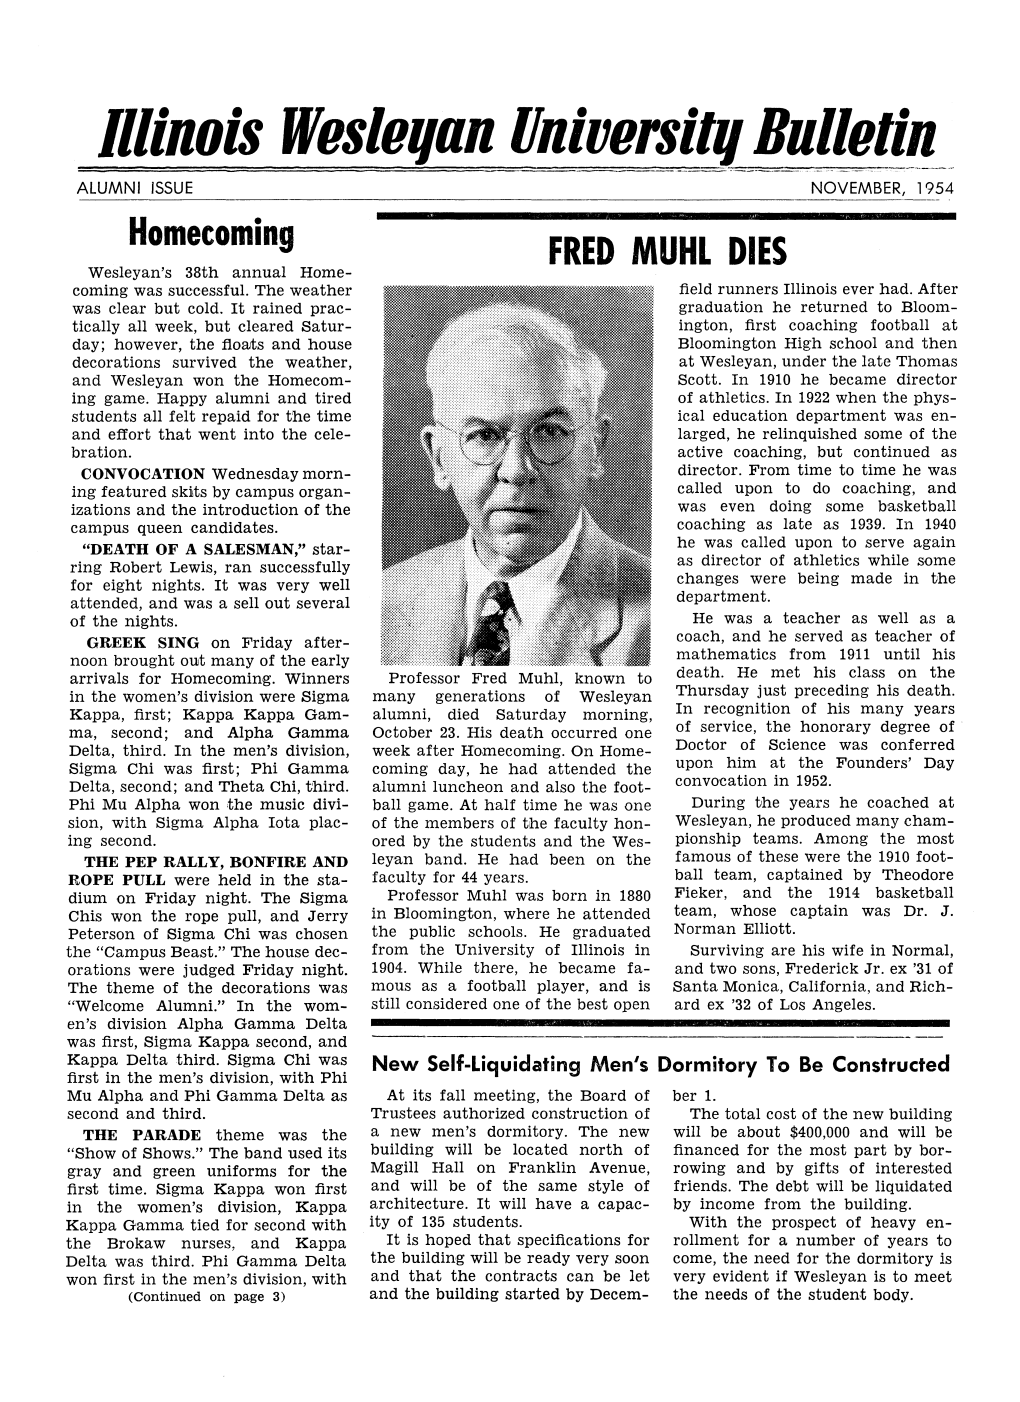 Illinois Wesleqan Universitq Bulletin ALUMNI ISSUE NOVEMBER, 1954 Homecoming FRED MUHL DIES Wesleyan's 38Th Annual Home- Coming Was Successful